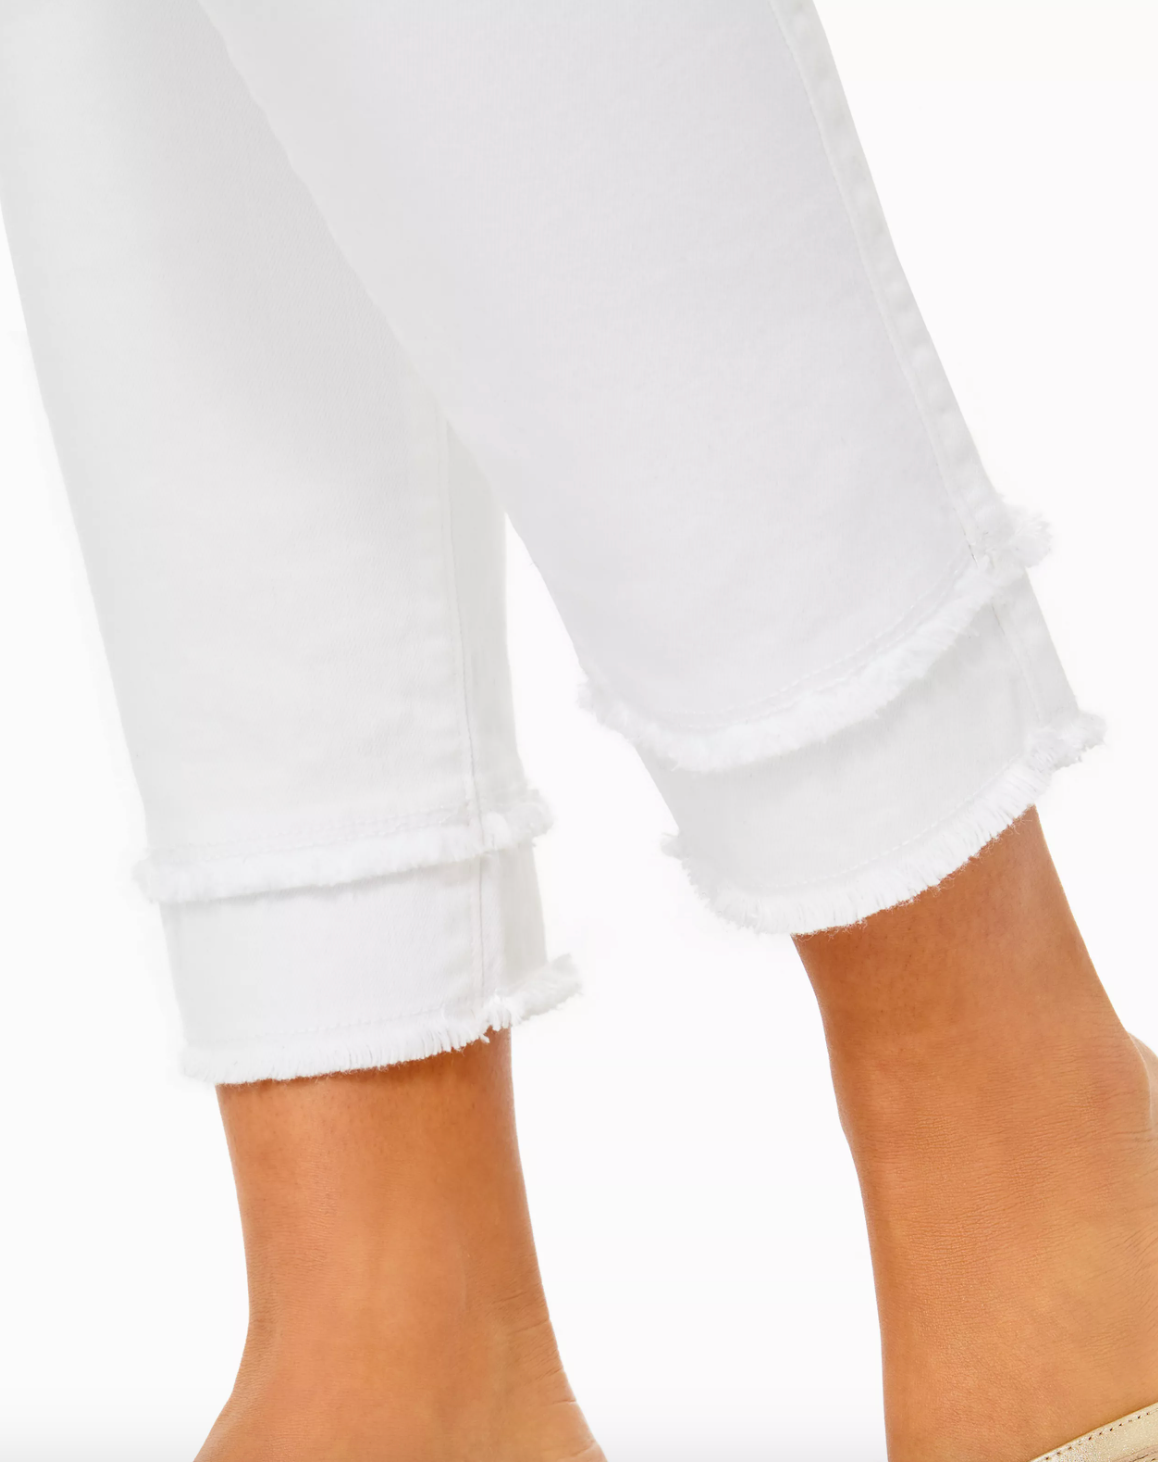 Lilly Pulitzer | South Ocean High Rise Skinny jean